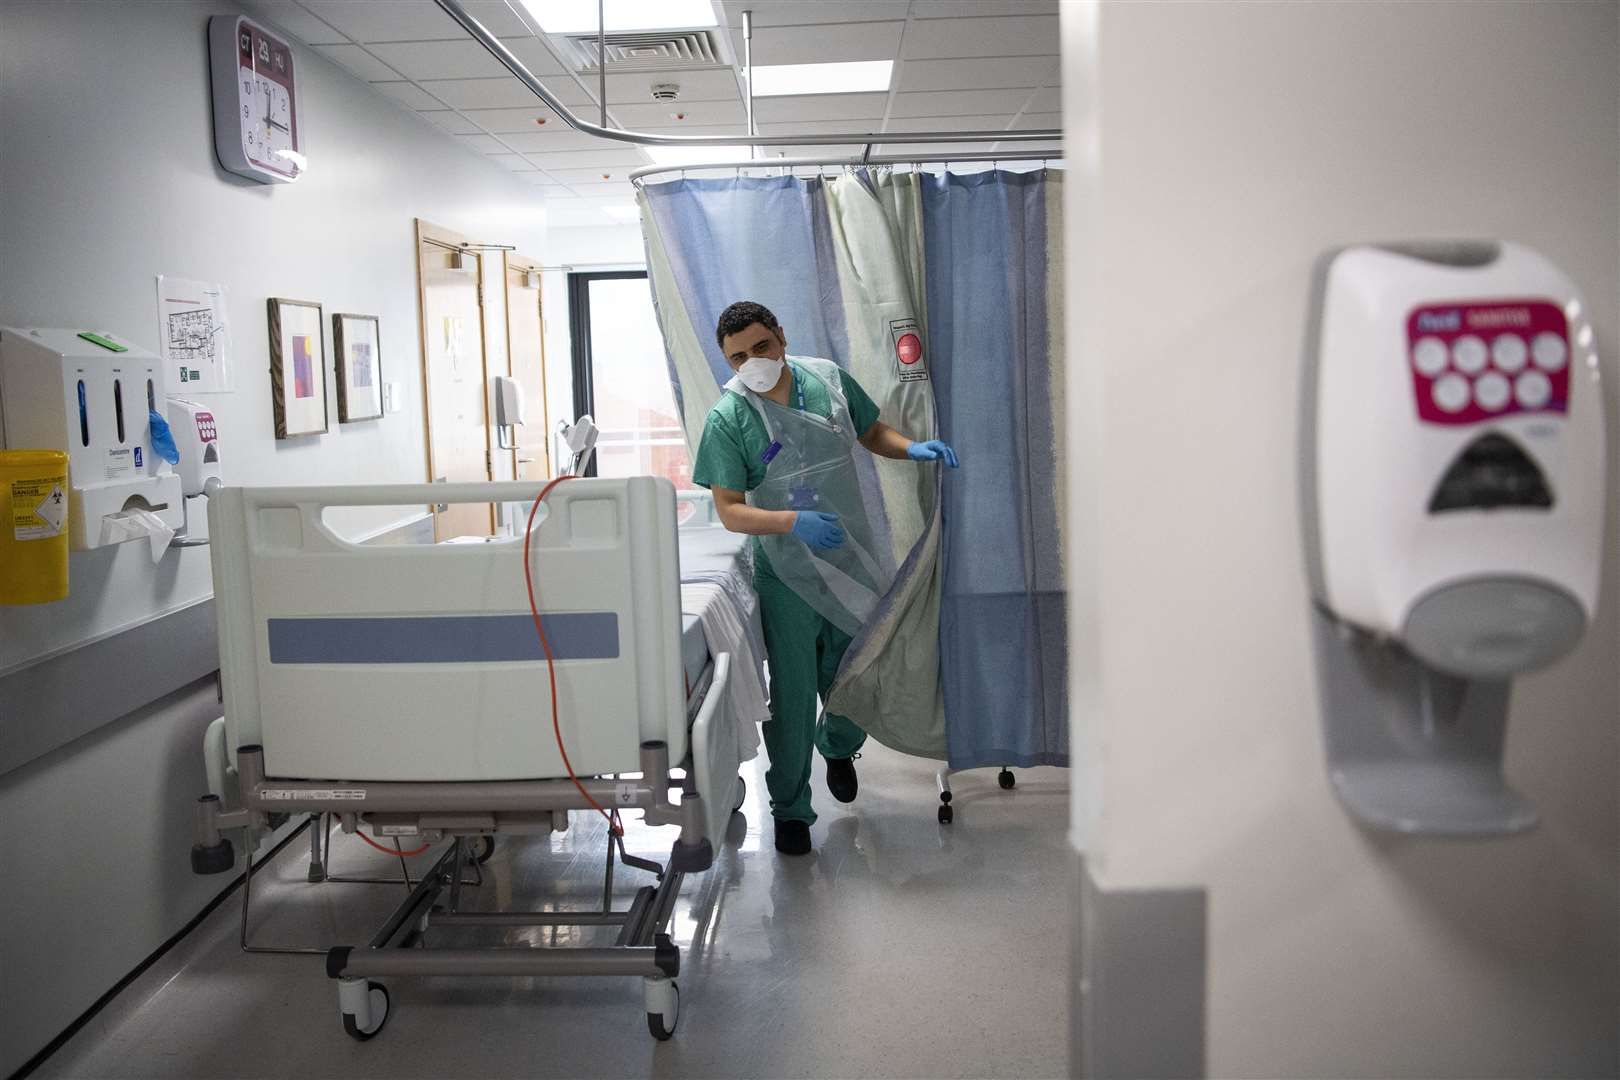 A staff nurse walks through the Acute Dependency Unit after taking food to a patient (Victoria Jones/PA)